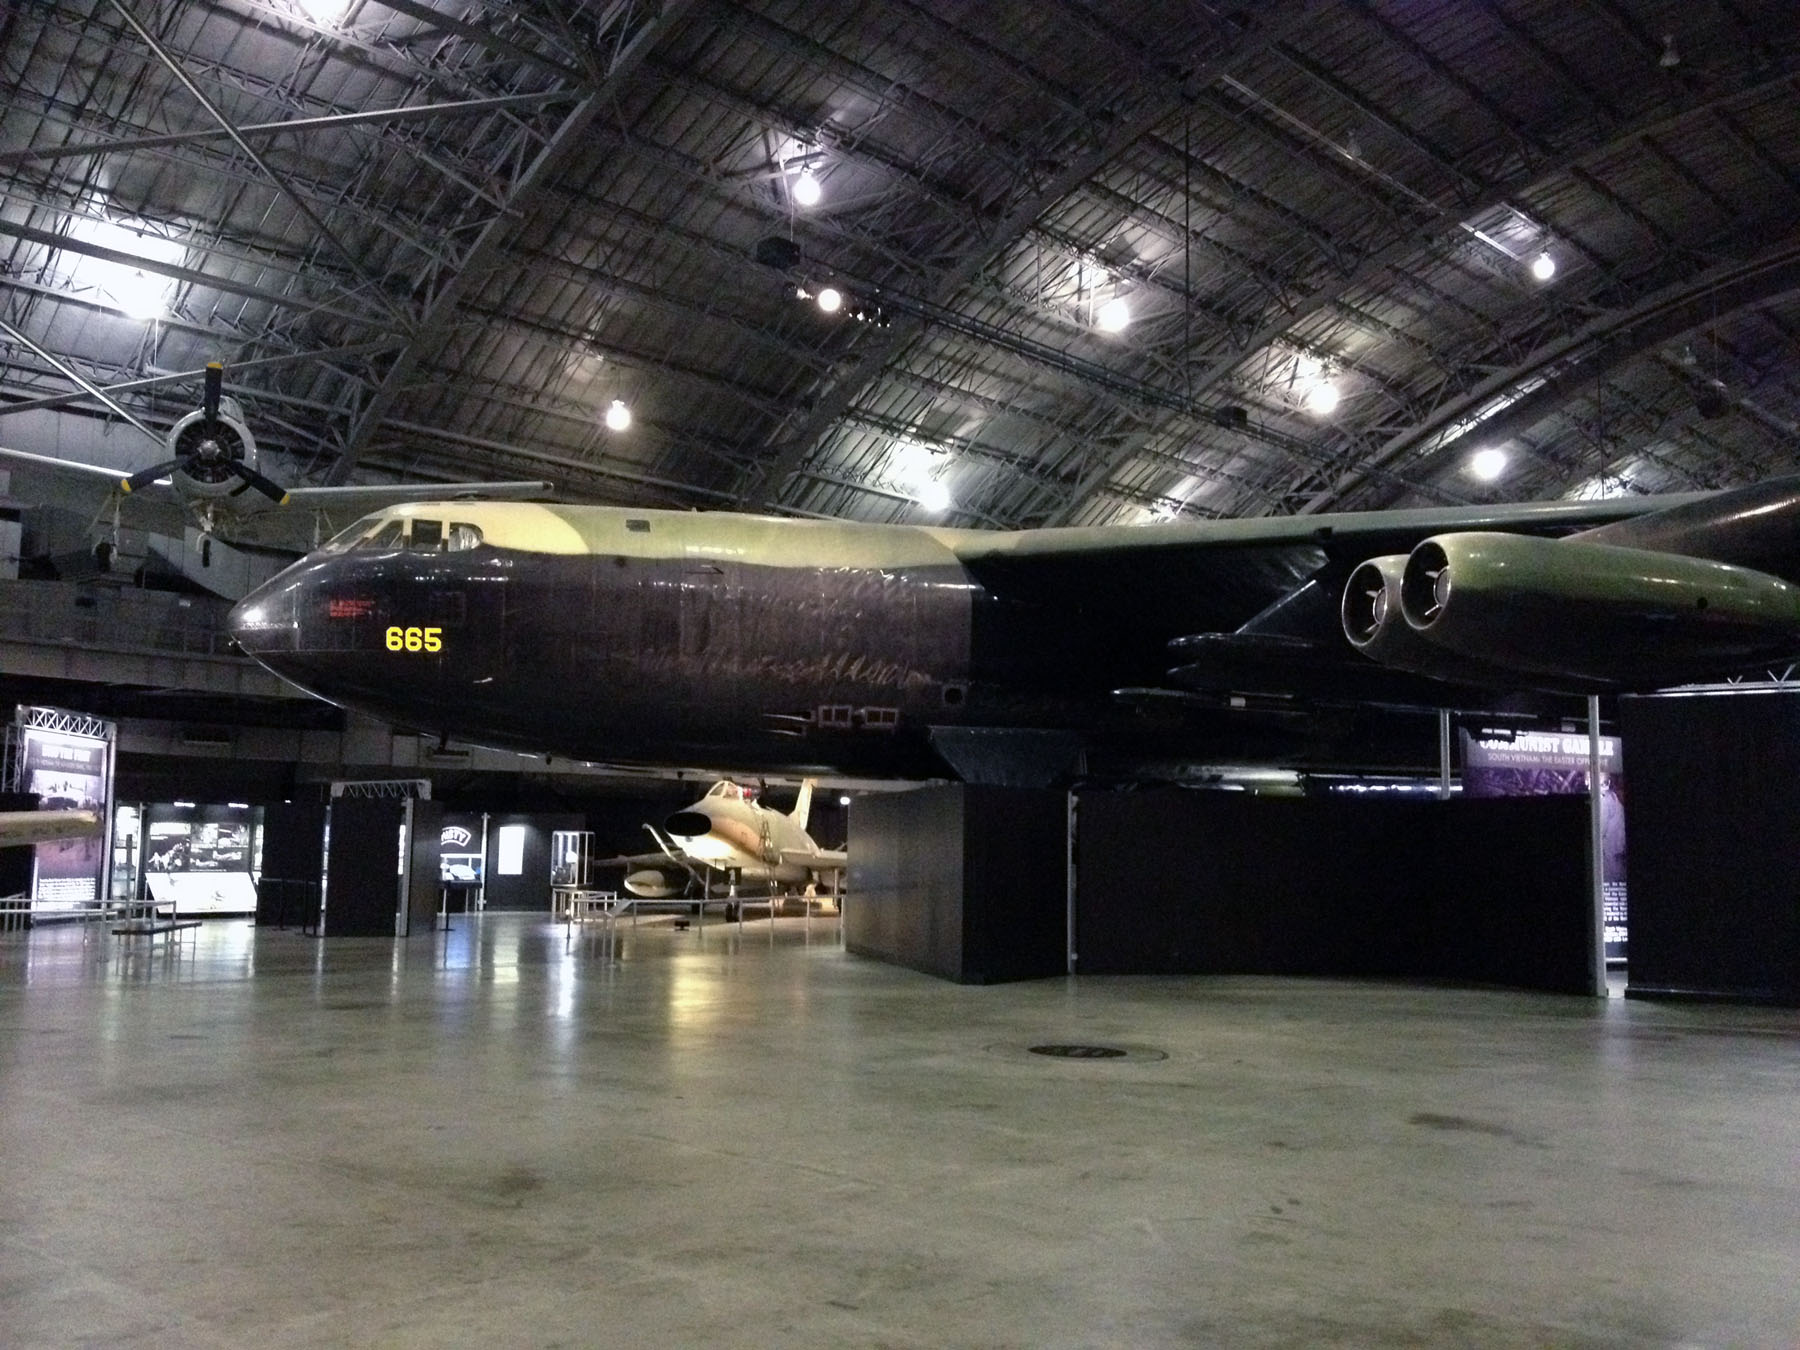 Boeing B-52D Stratofortress stands on display in the Southeast Asia War Gallery at the National Museum of the United States Air Force in Dayton, Ohio. (U.S. Air Force photo)